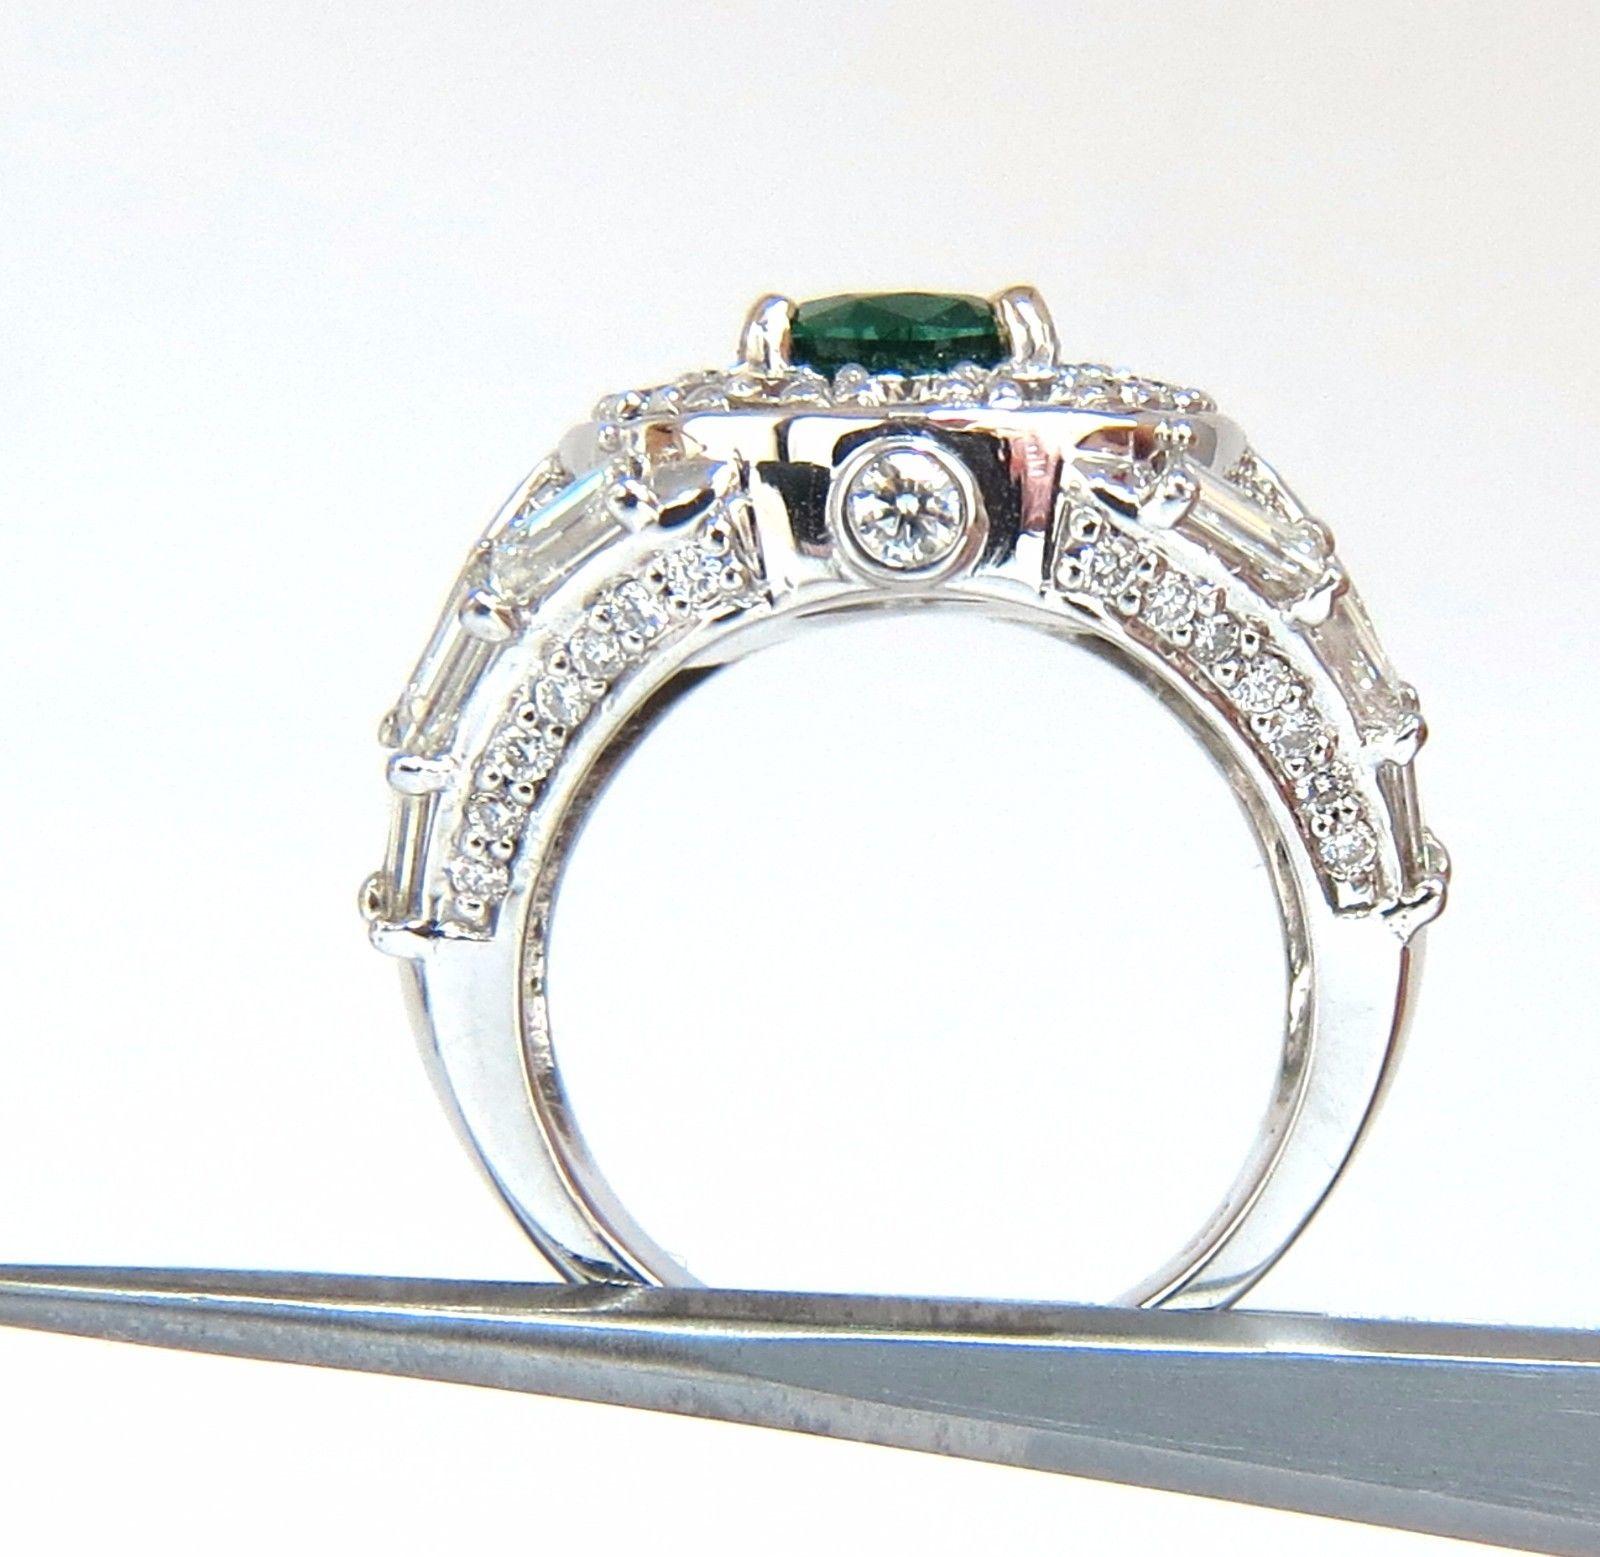 6.00 Carat Natural Vivid Bright Green Emerald Diamonds Ring 14 Karat In New Condition For Sale In New York, NY